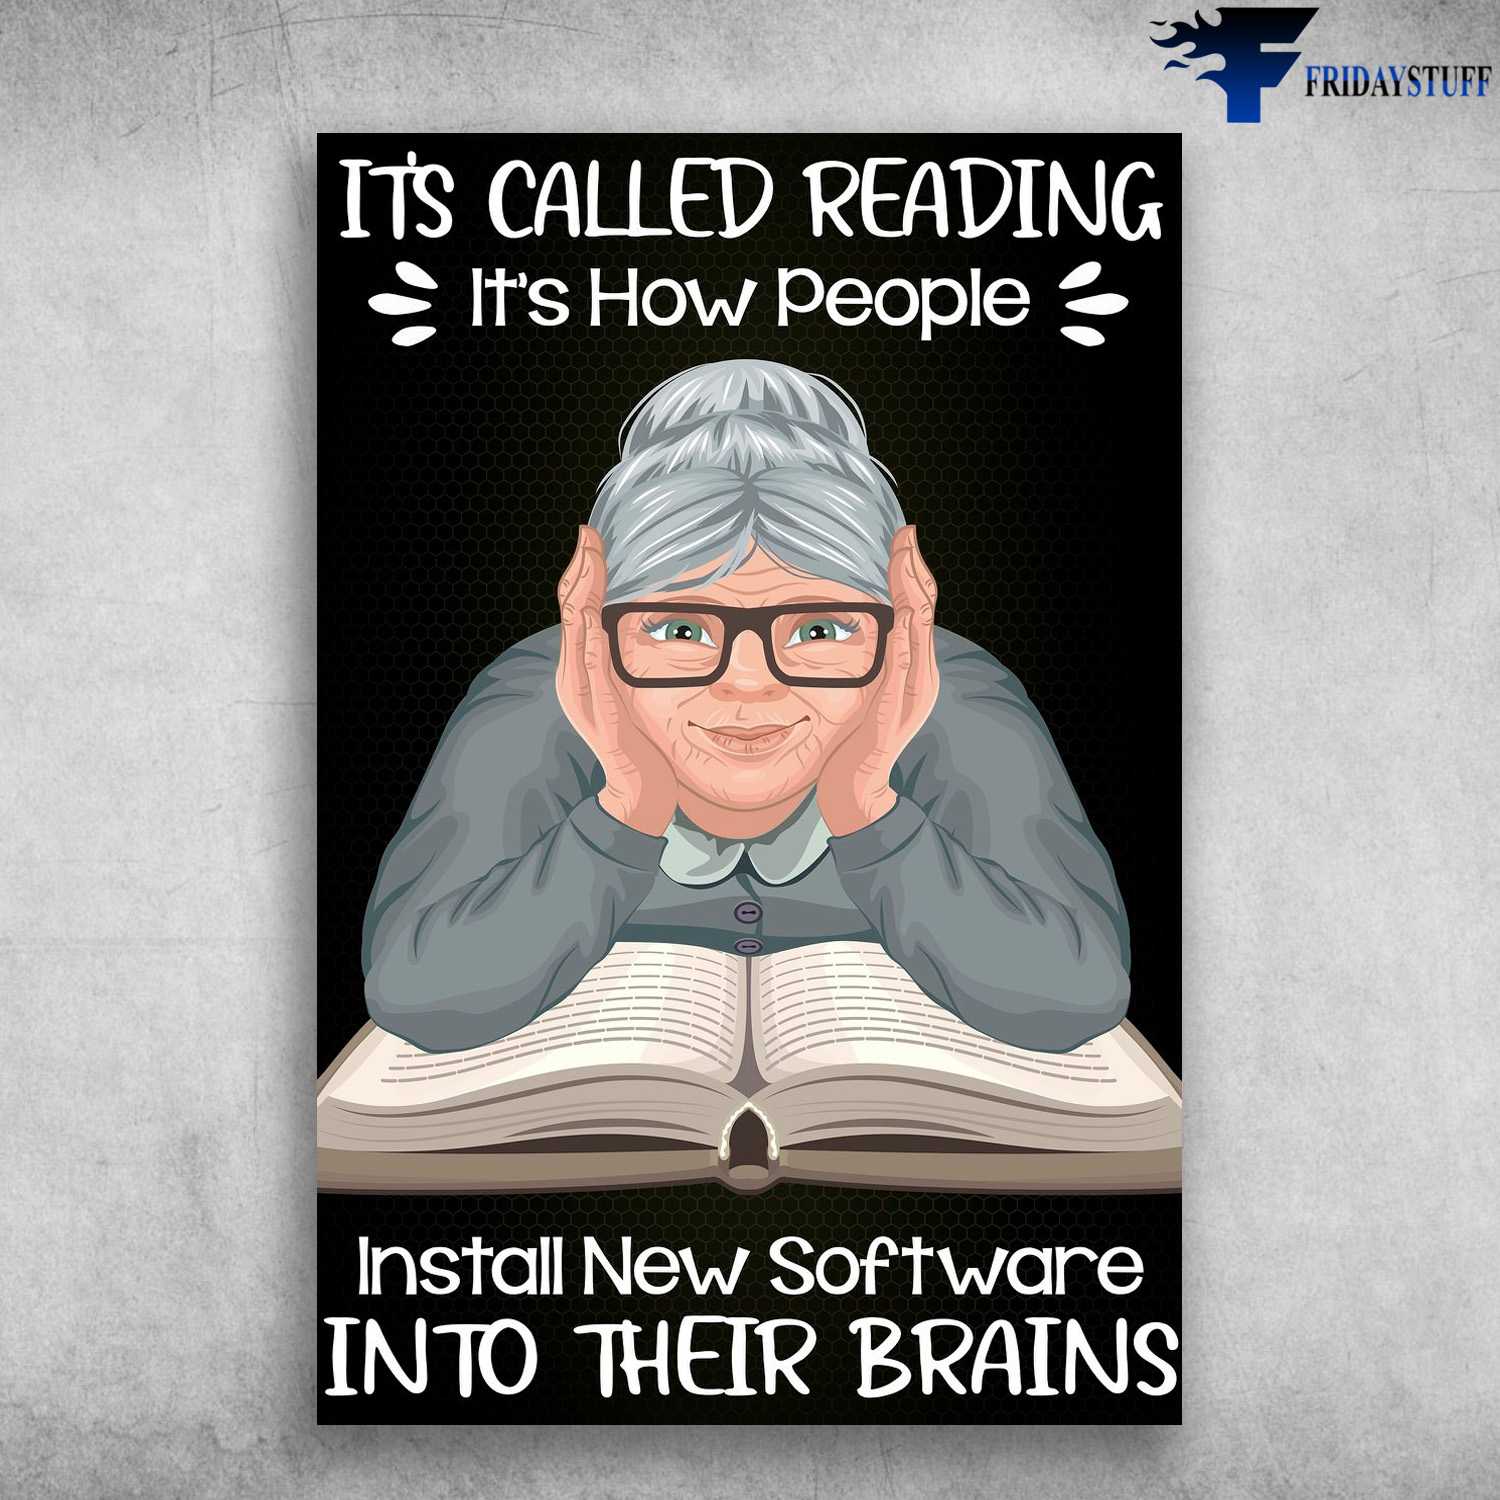 Gift For Reader, Book Lover, It's Called Reading, It's How People, Install New Software, Into Their Brains